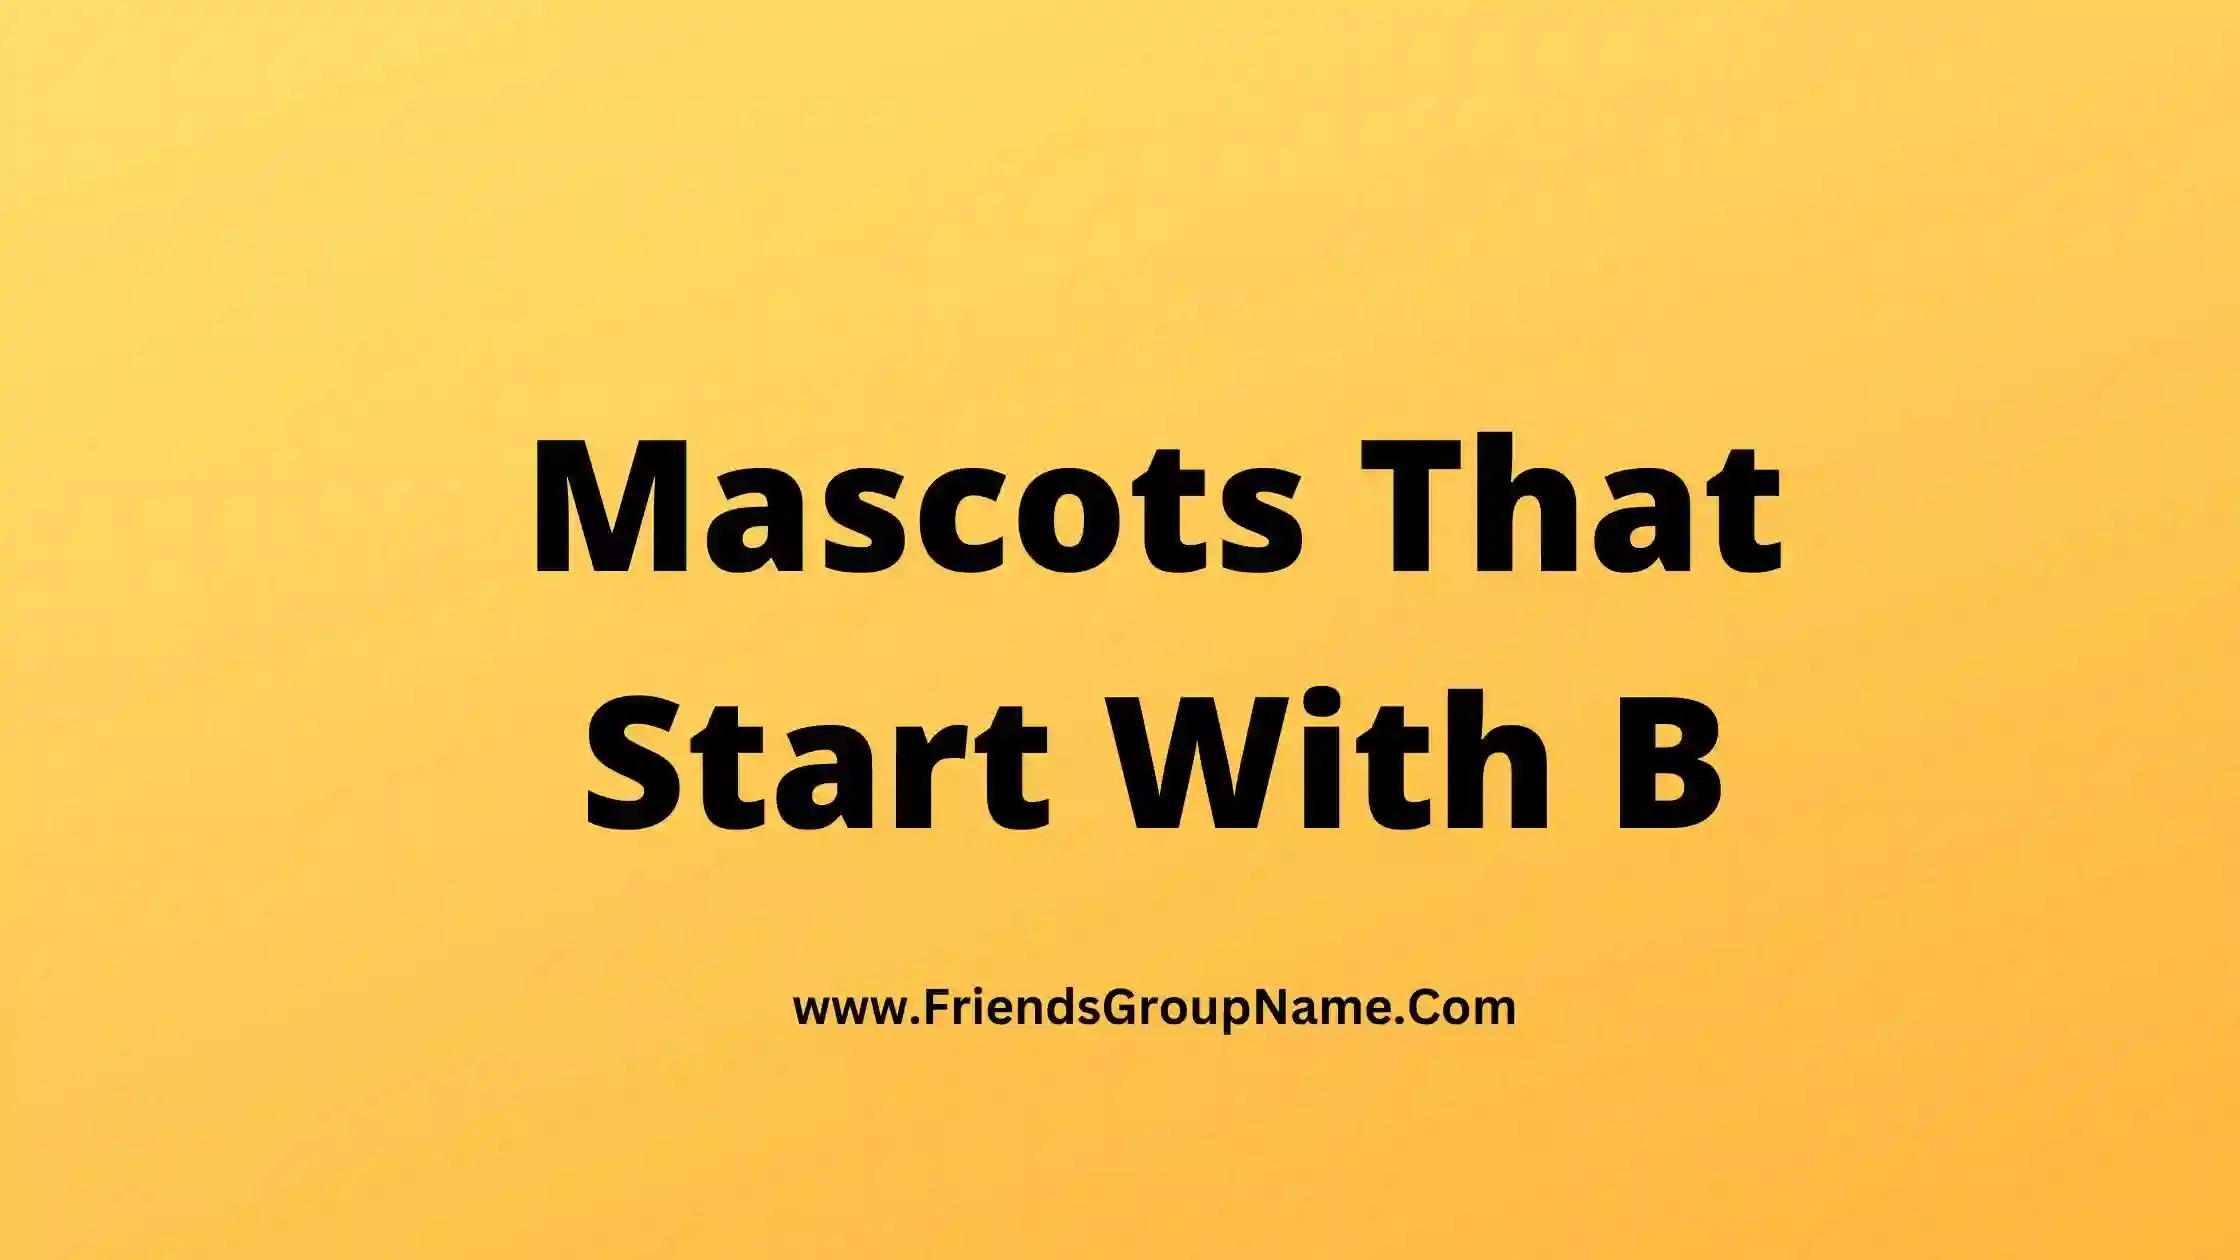 Mascots That Start With B